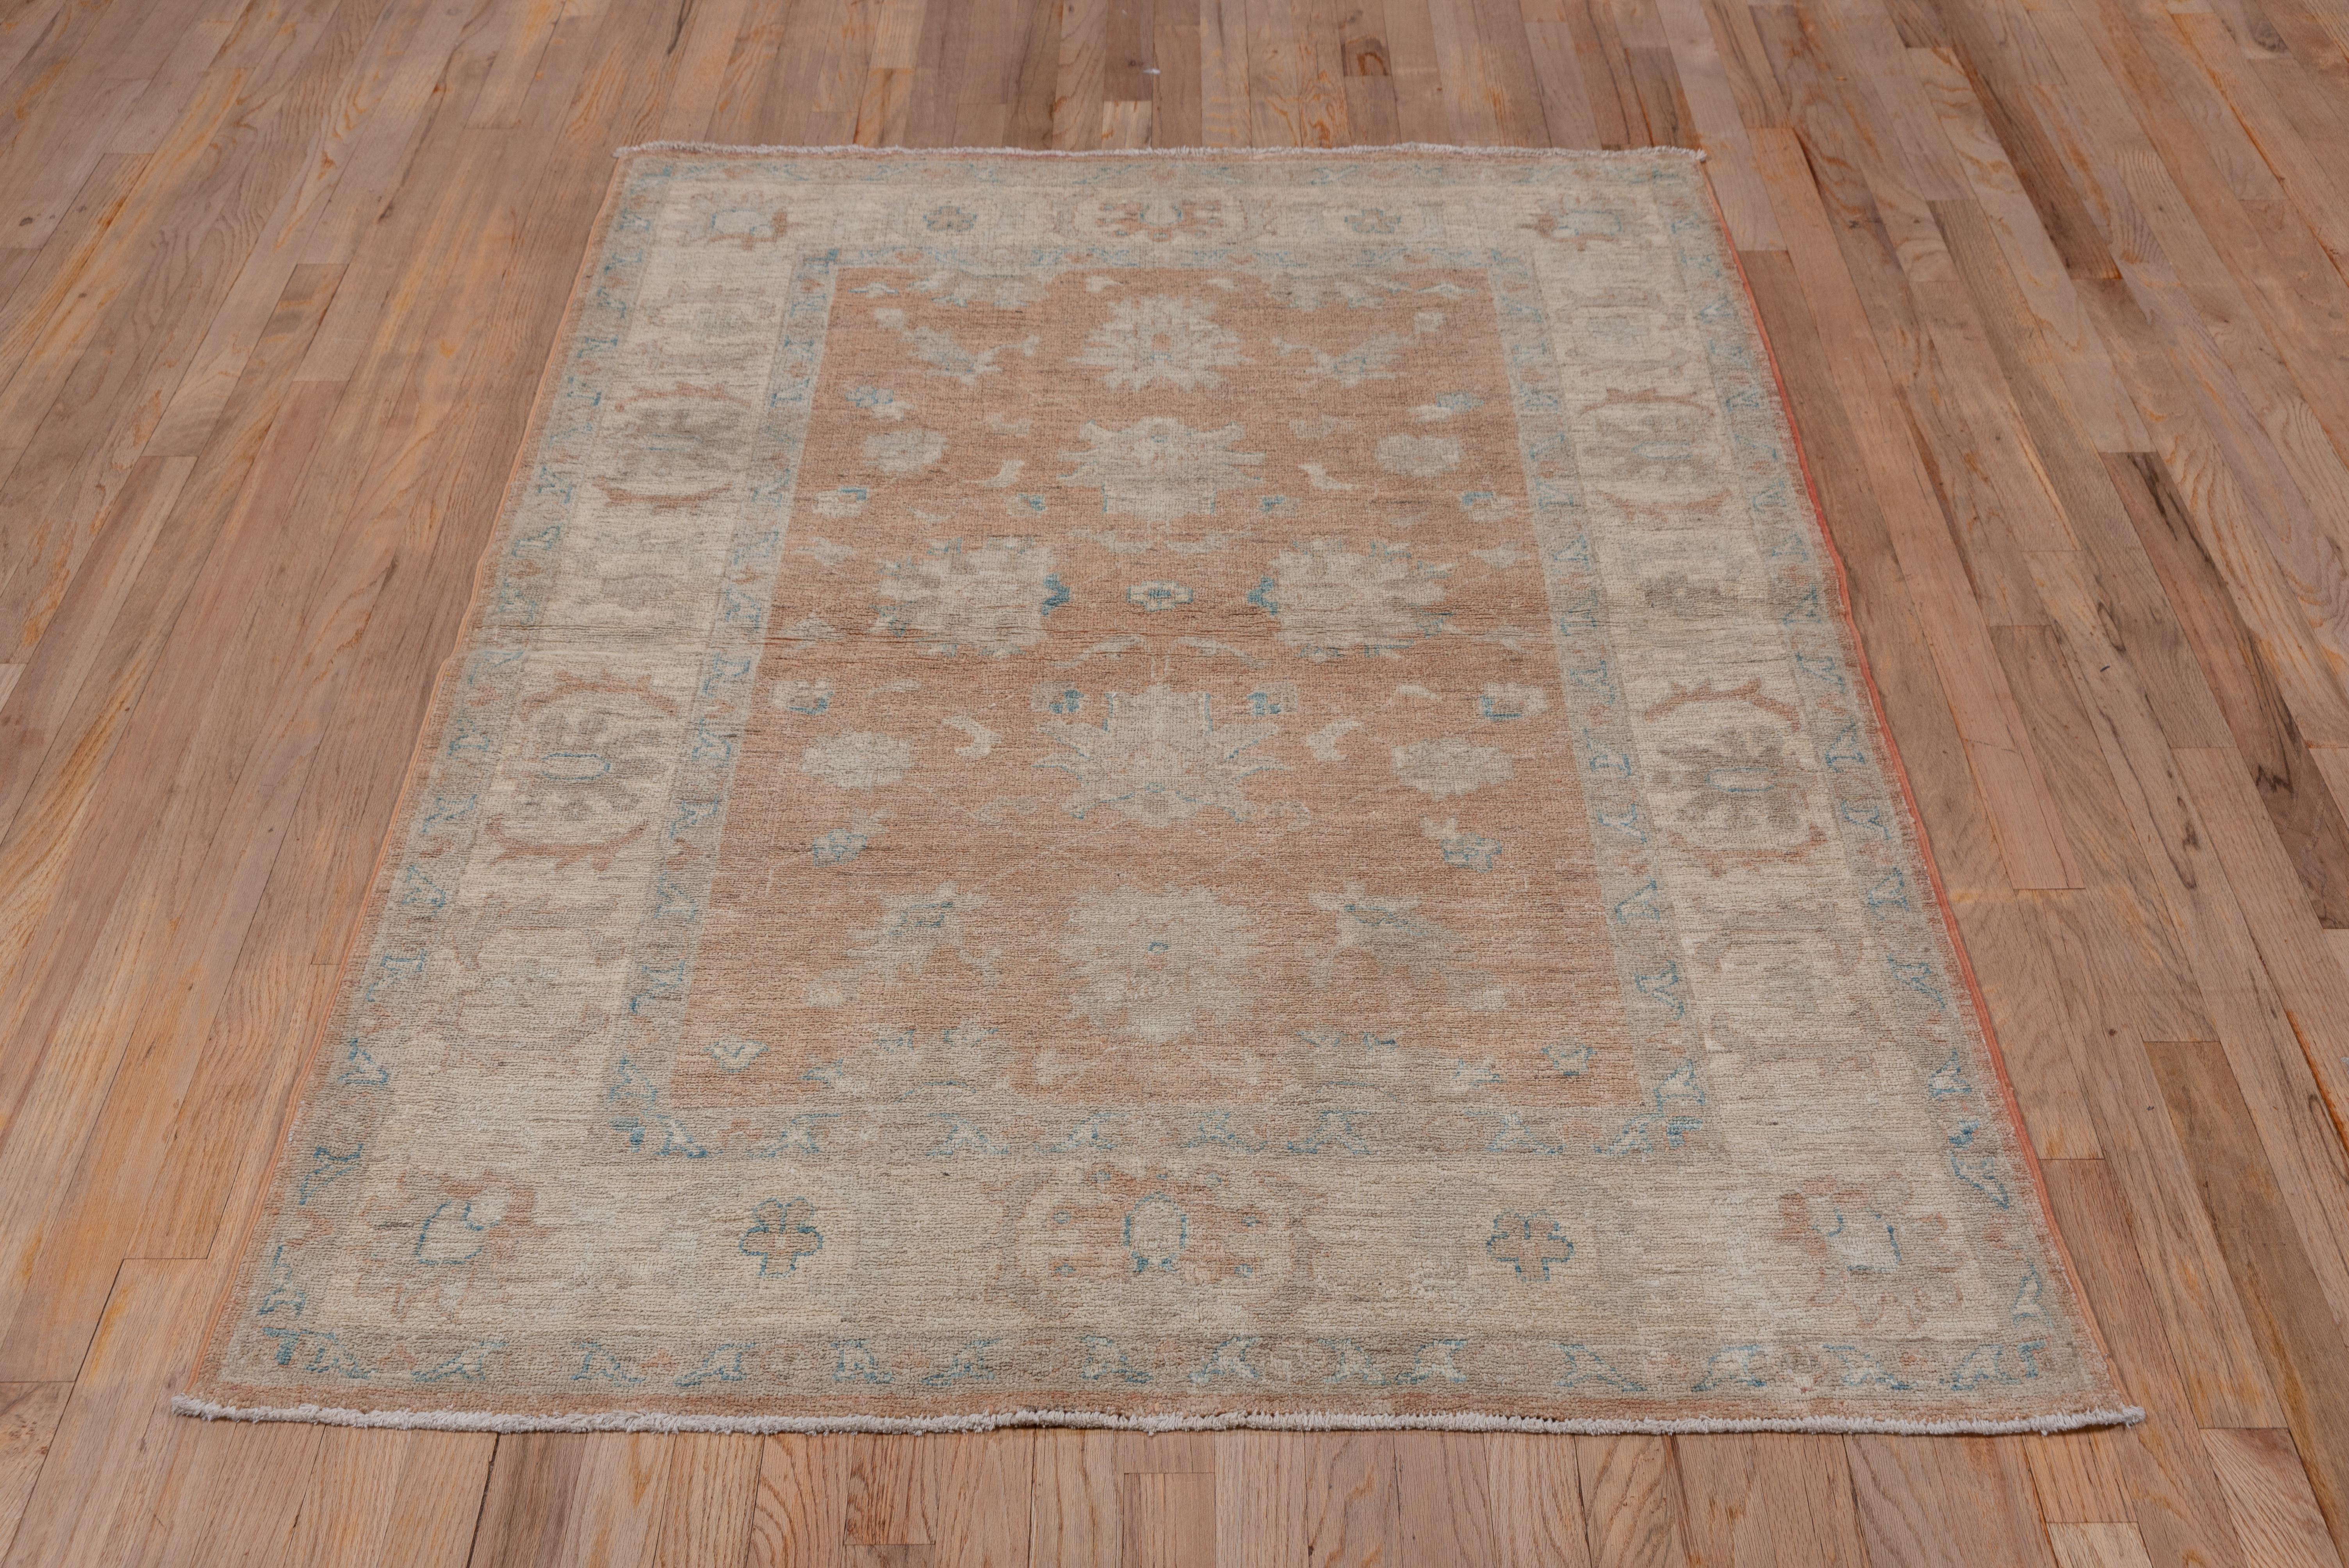 In the general Oushak style, this softly toned scatter rug shows well-spaced ragged and finger palmettes on the abrashed light brown or tan ground. The sand border presents more finger palmettes and bracketing saz leaves.